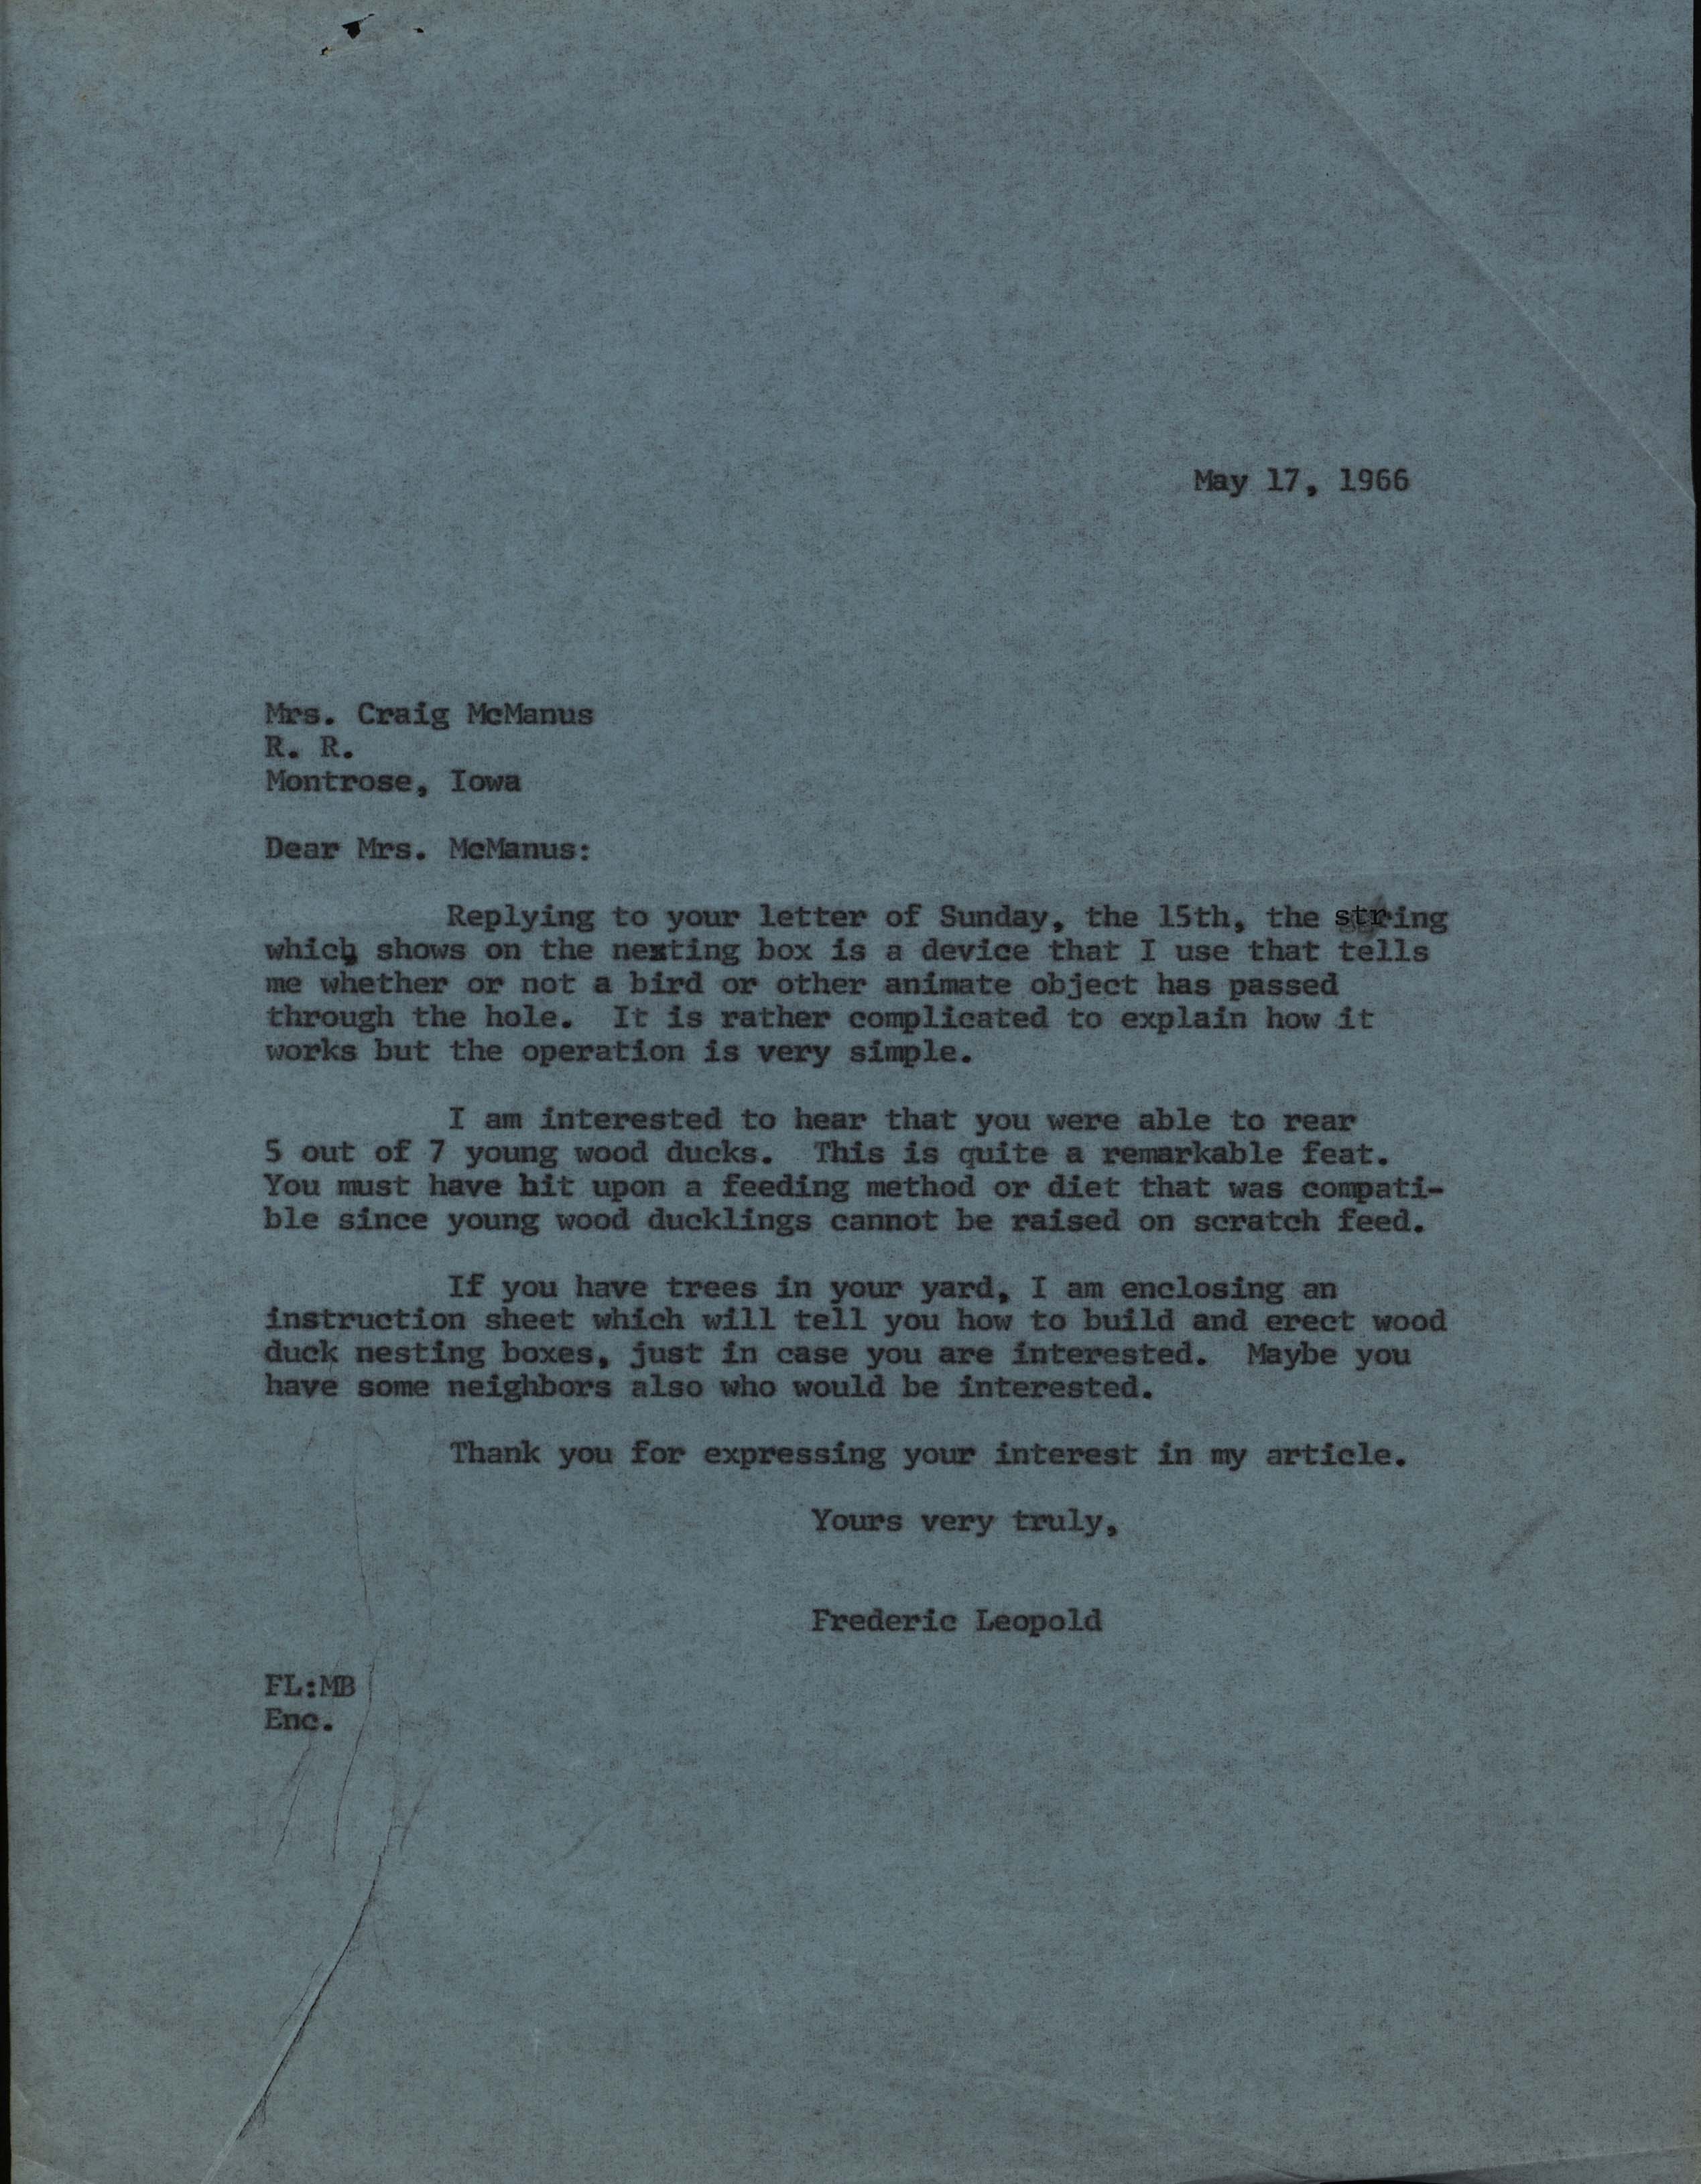 Frederic Leopold letter to Grace McManis regarding Wood Duck houses, May 17, 1966